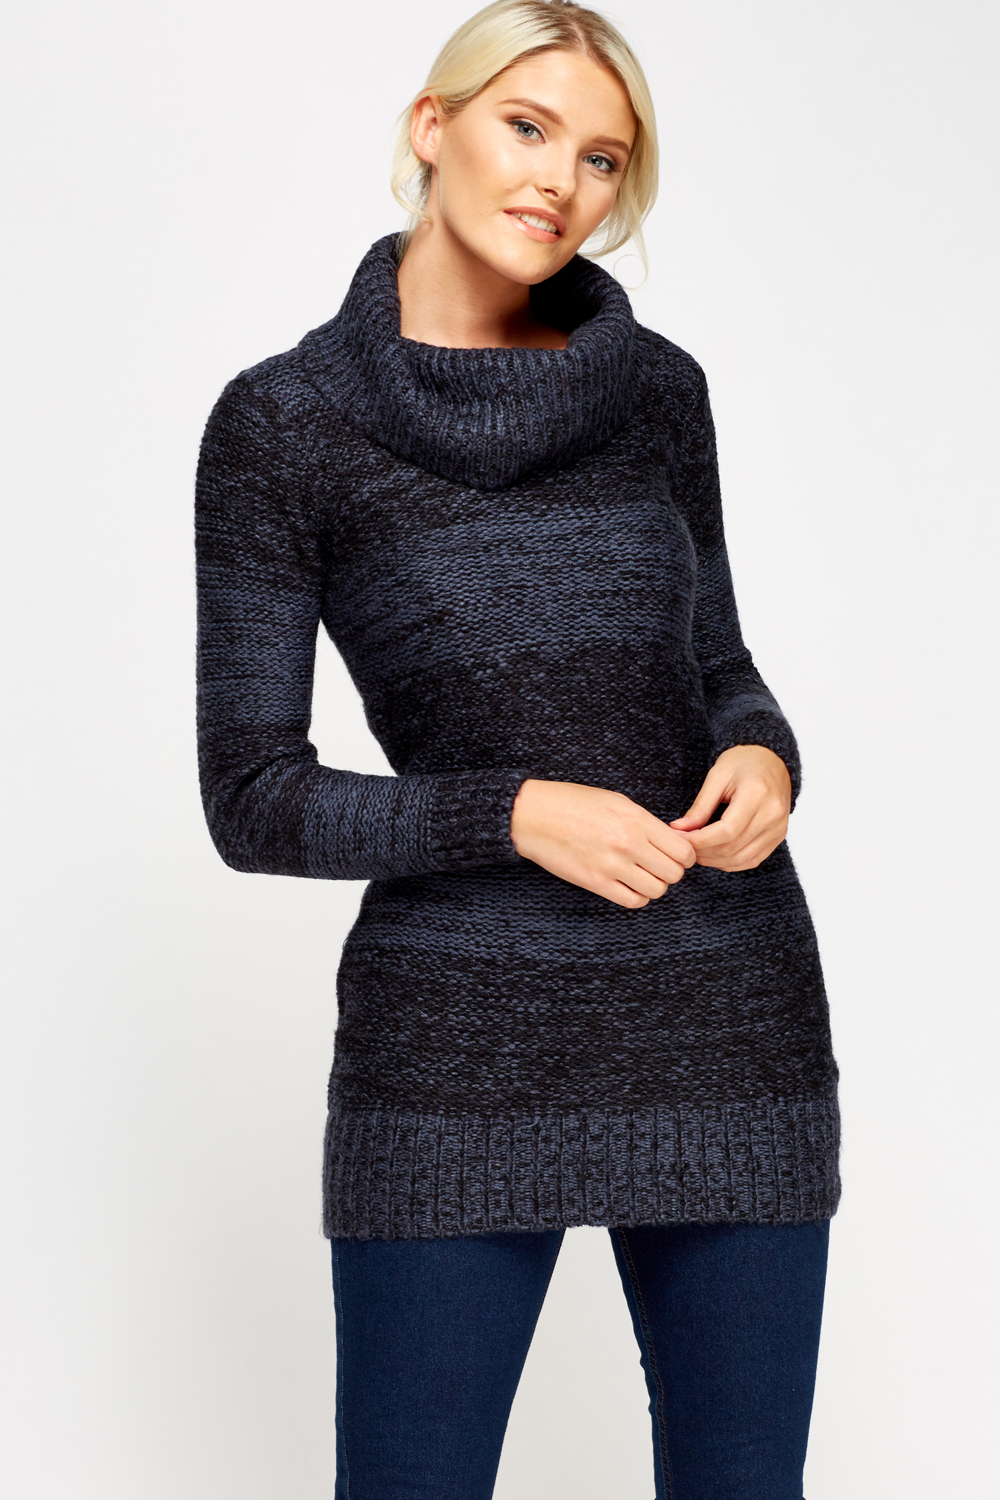 Cowl Neck Knitted Long Jumper Just 7